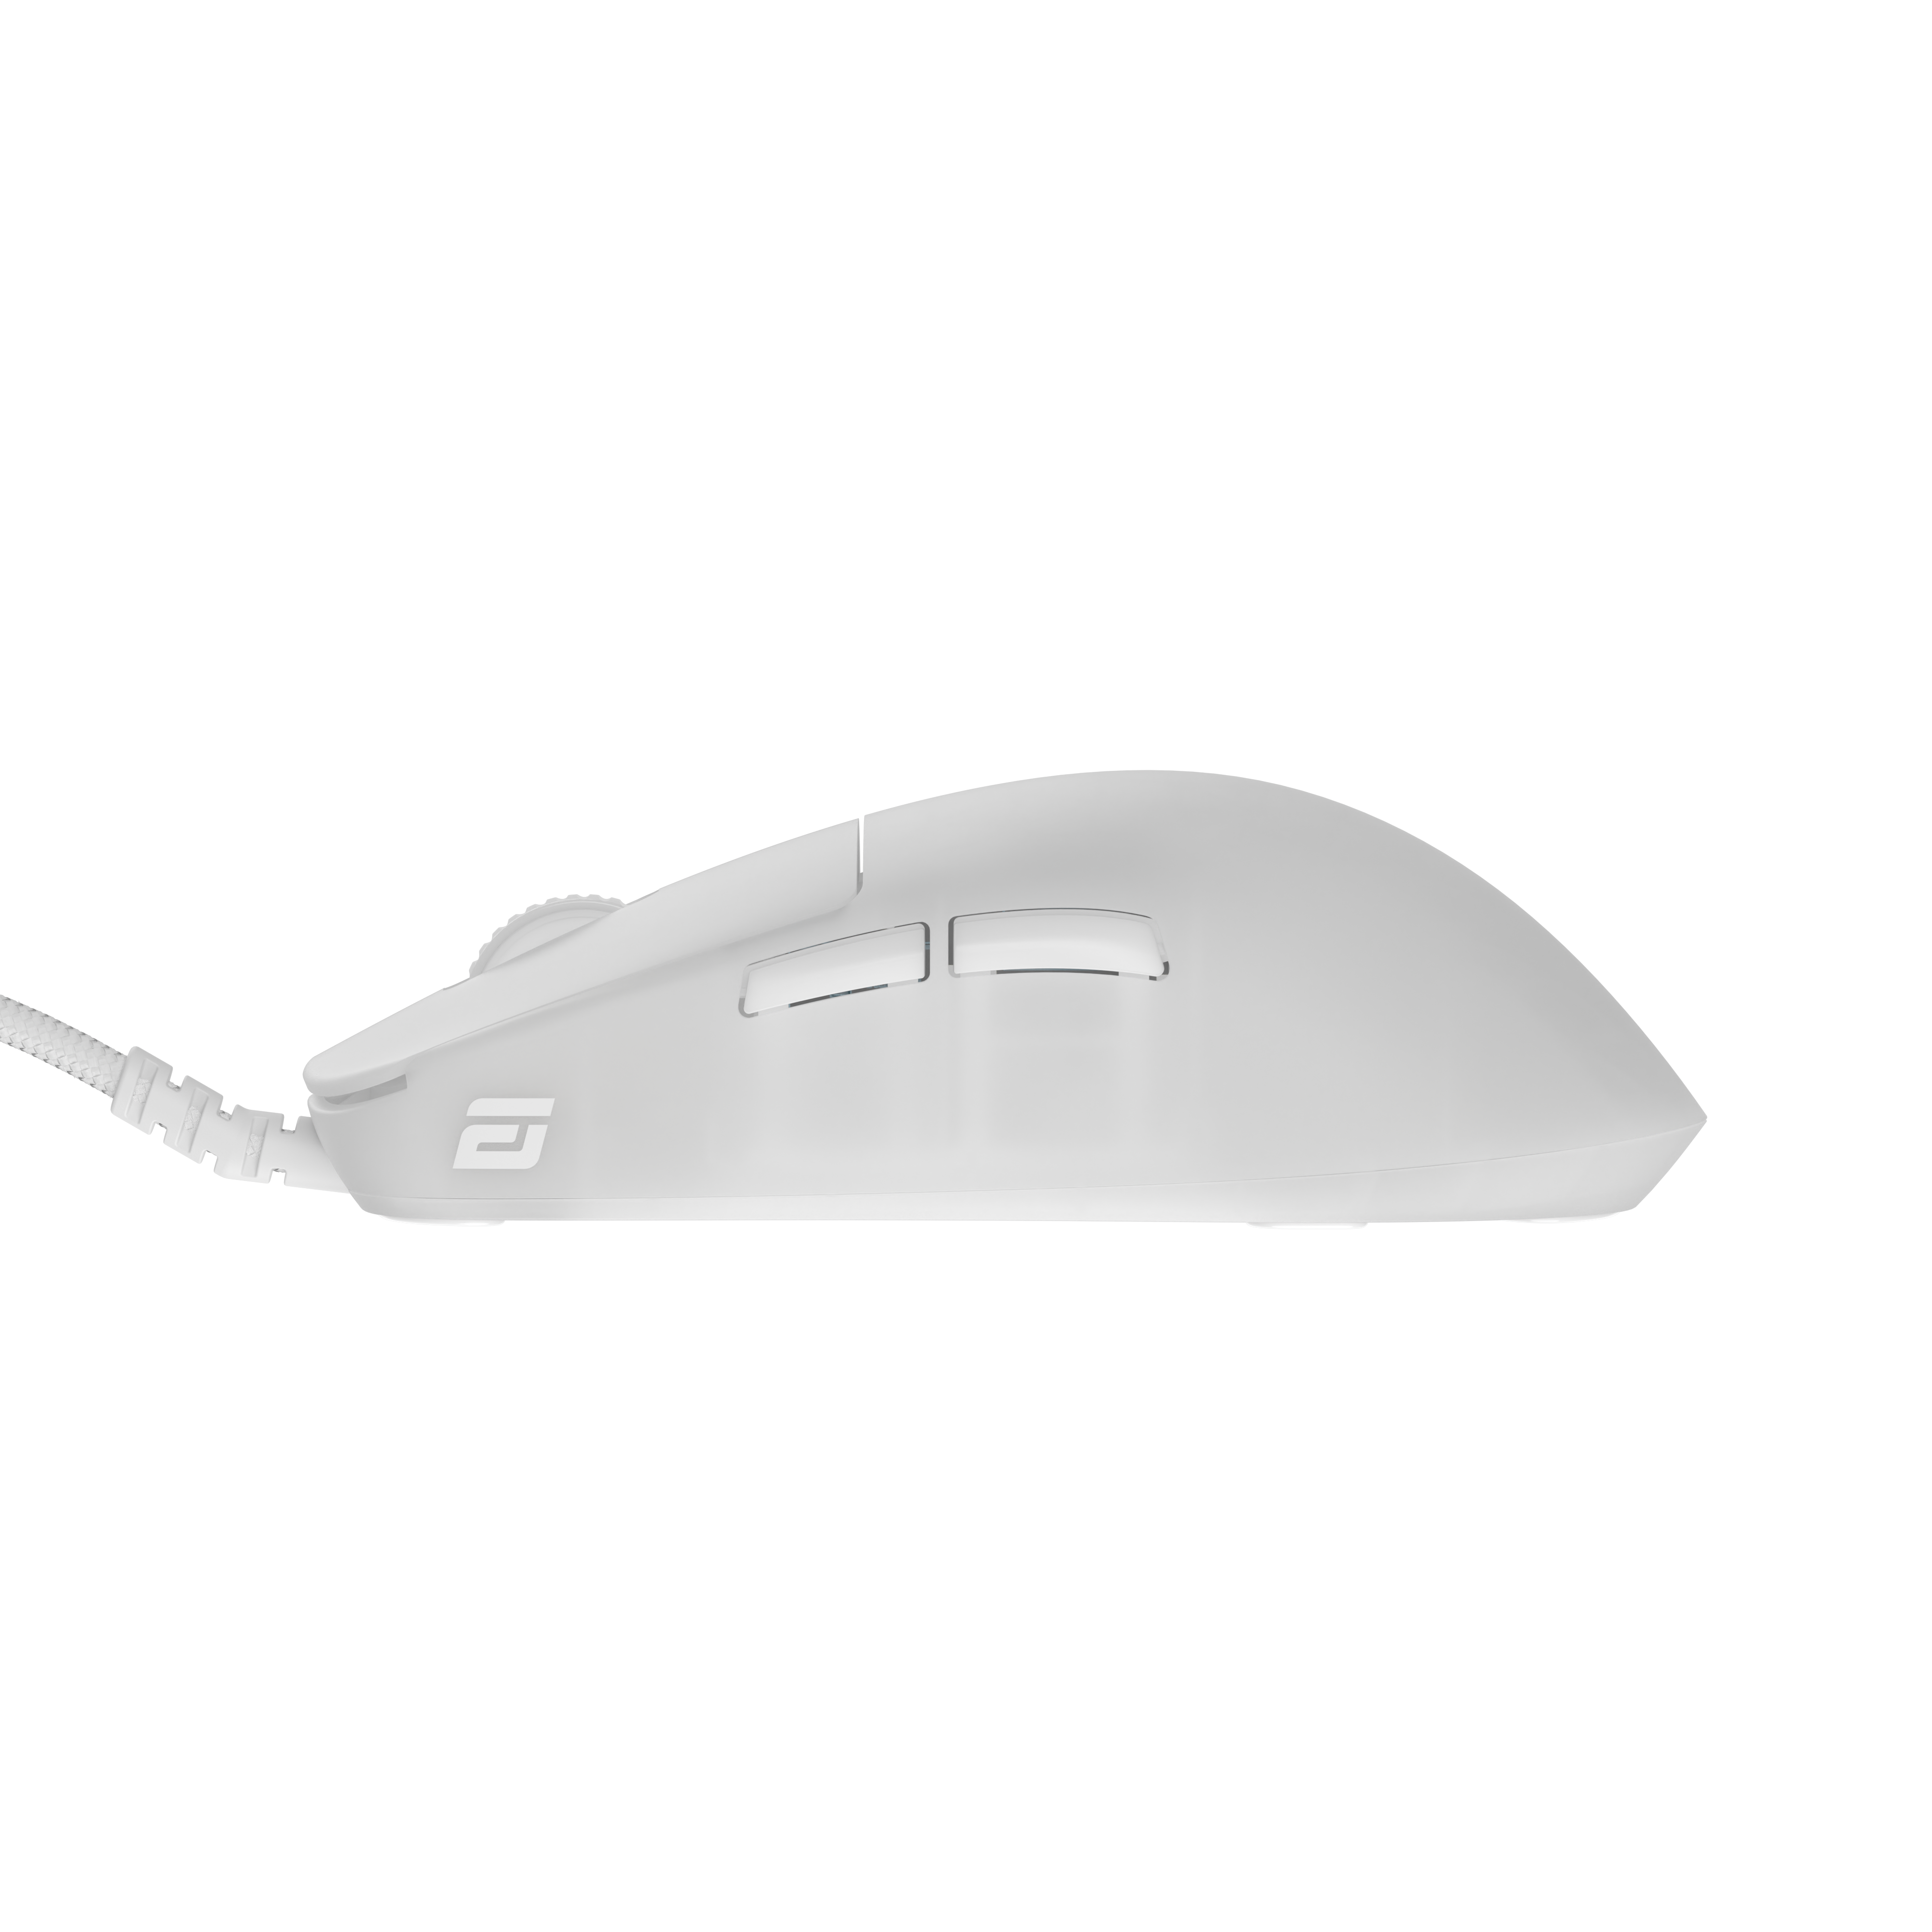 Endgame Gear - Endgame Gear OP1 USB RGB Optical Gaming Mouse - White Frost